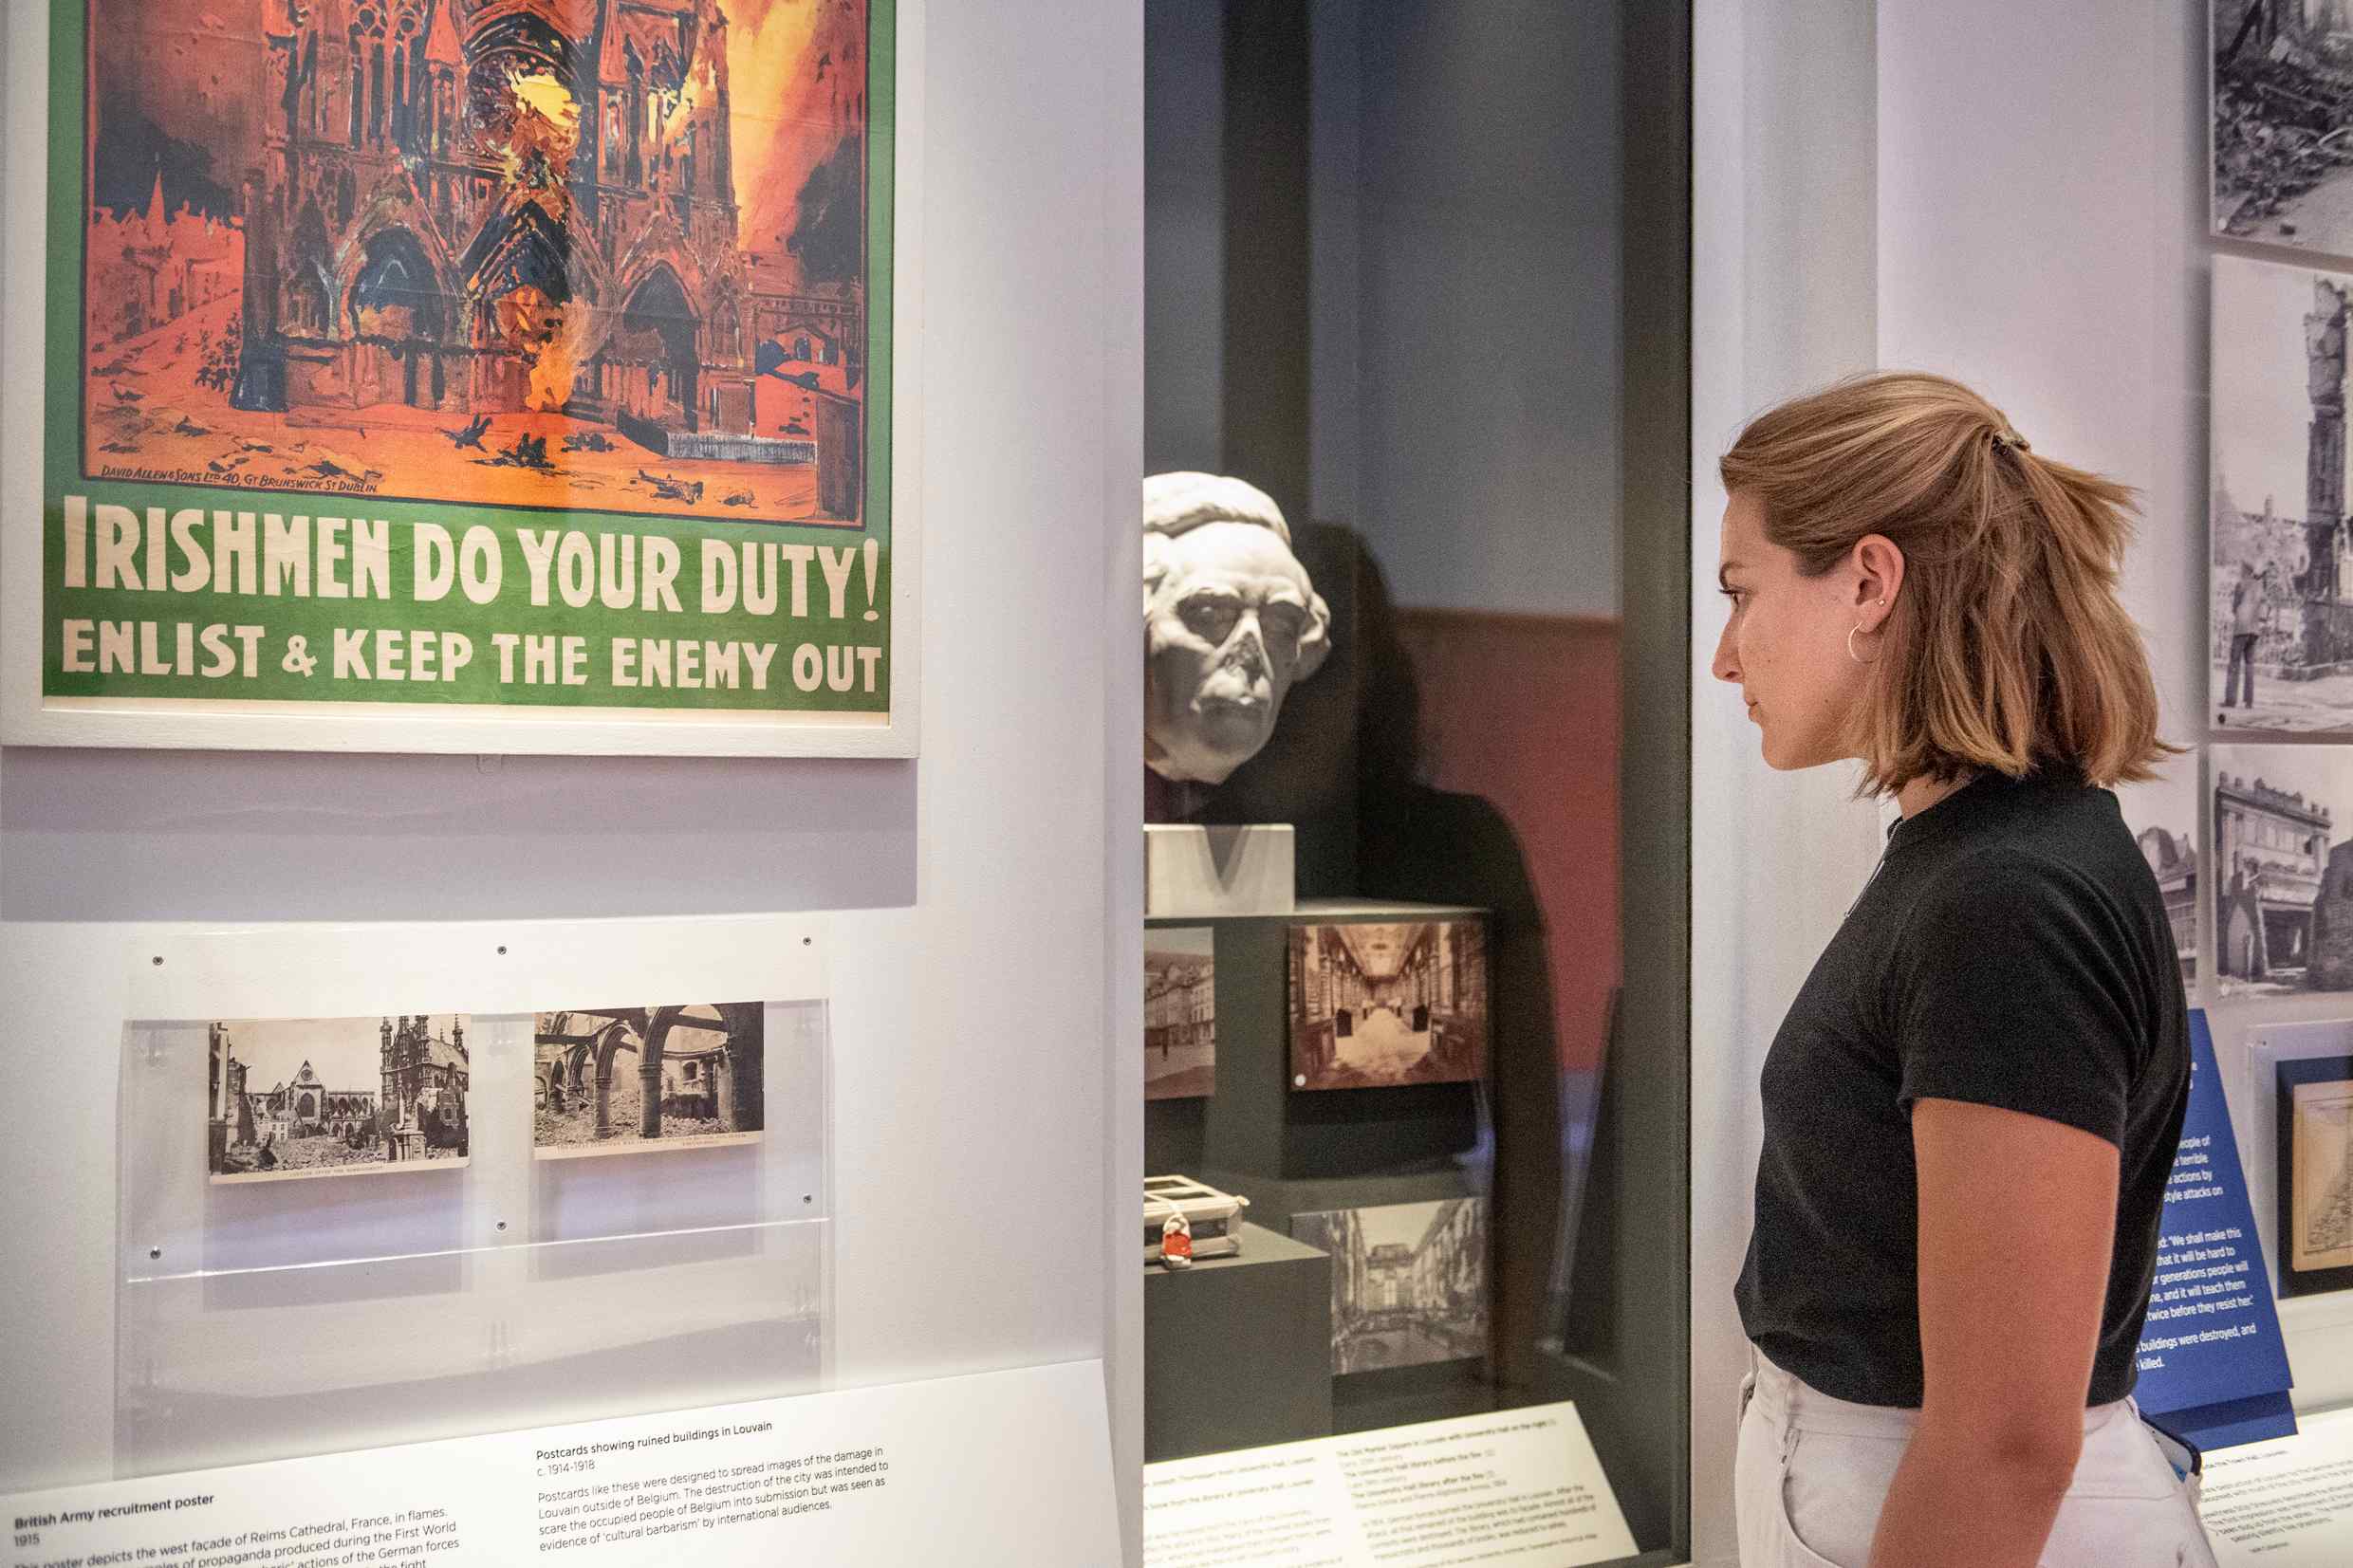 A woman visiting the What Remains exhibition looks into a display cabinet including a sculpture of a man's head that has had the nose knocked off. A poster to her left shows a church in flames and includes the text: "IRISHMEN DO YOUR DUTY! Enlist and keep the enemy out"